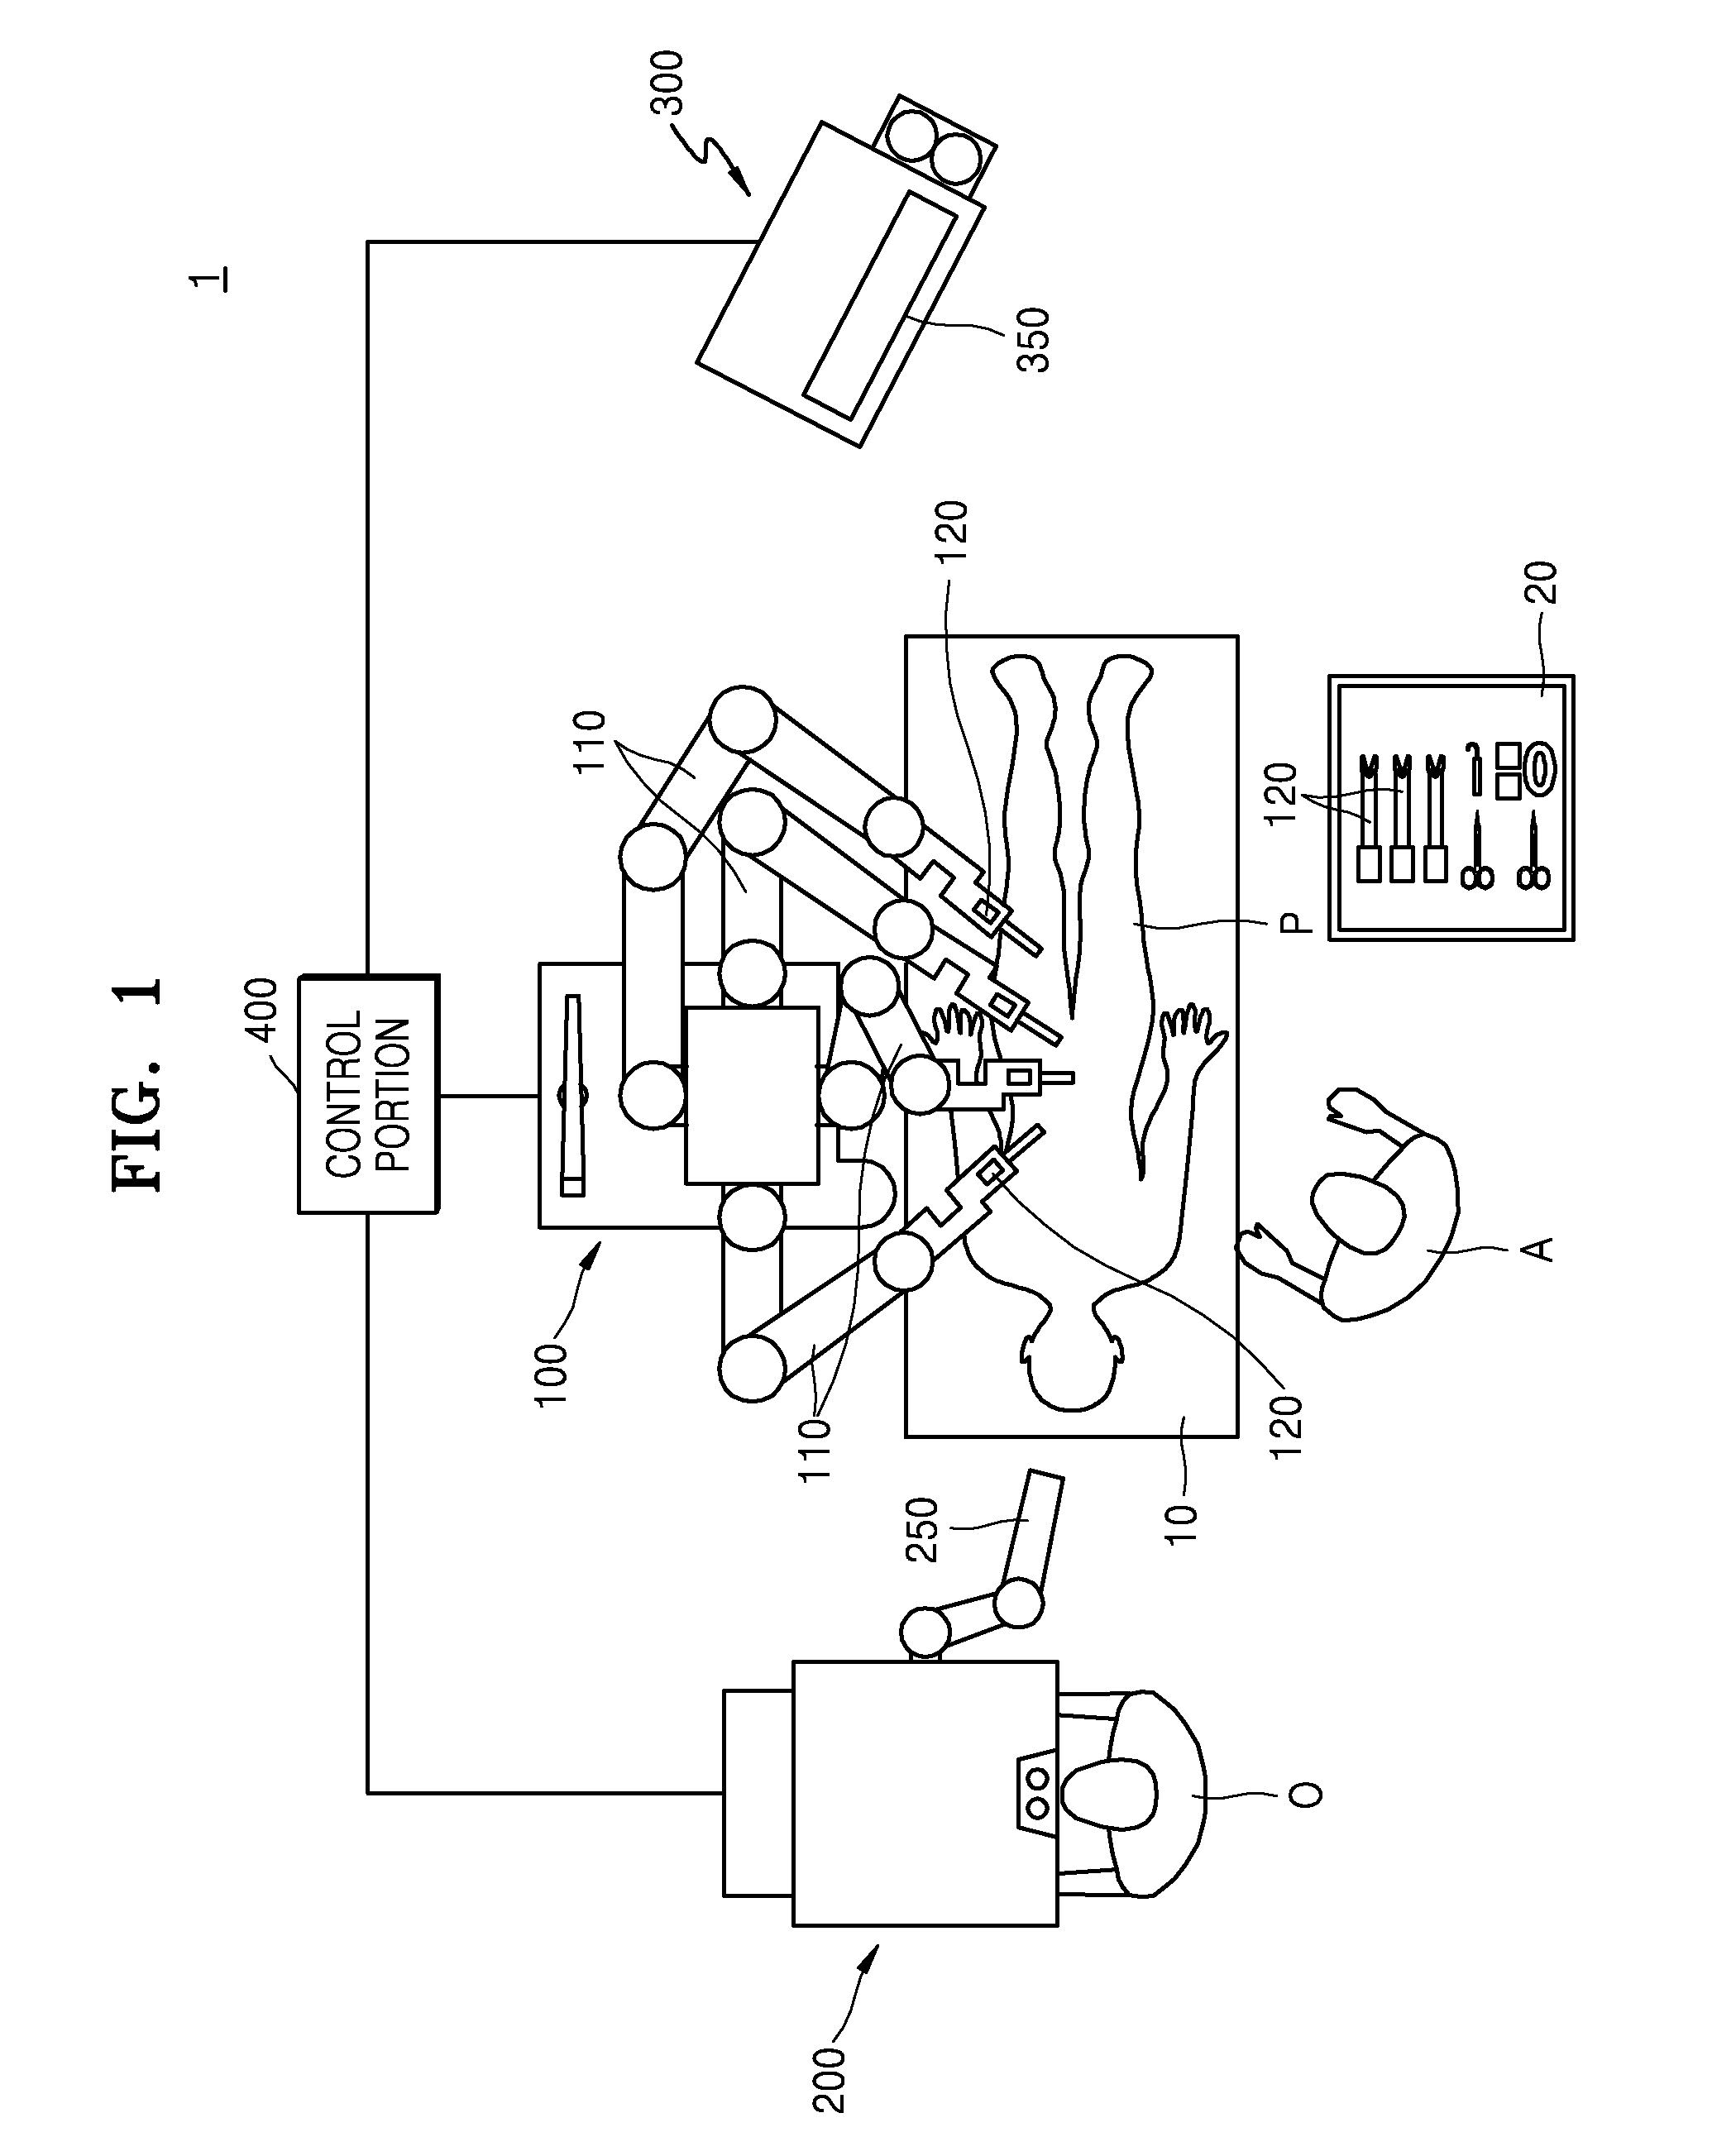 Surgical robot system and method for controlling surgical robot system